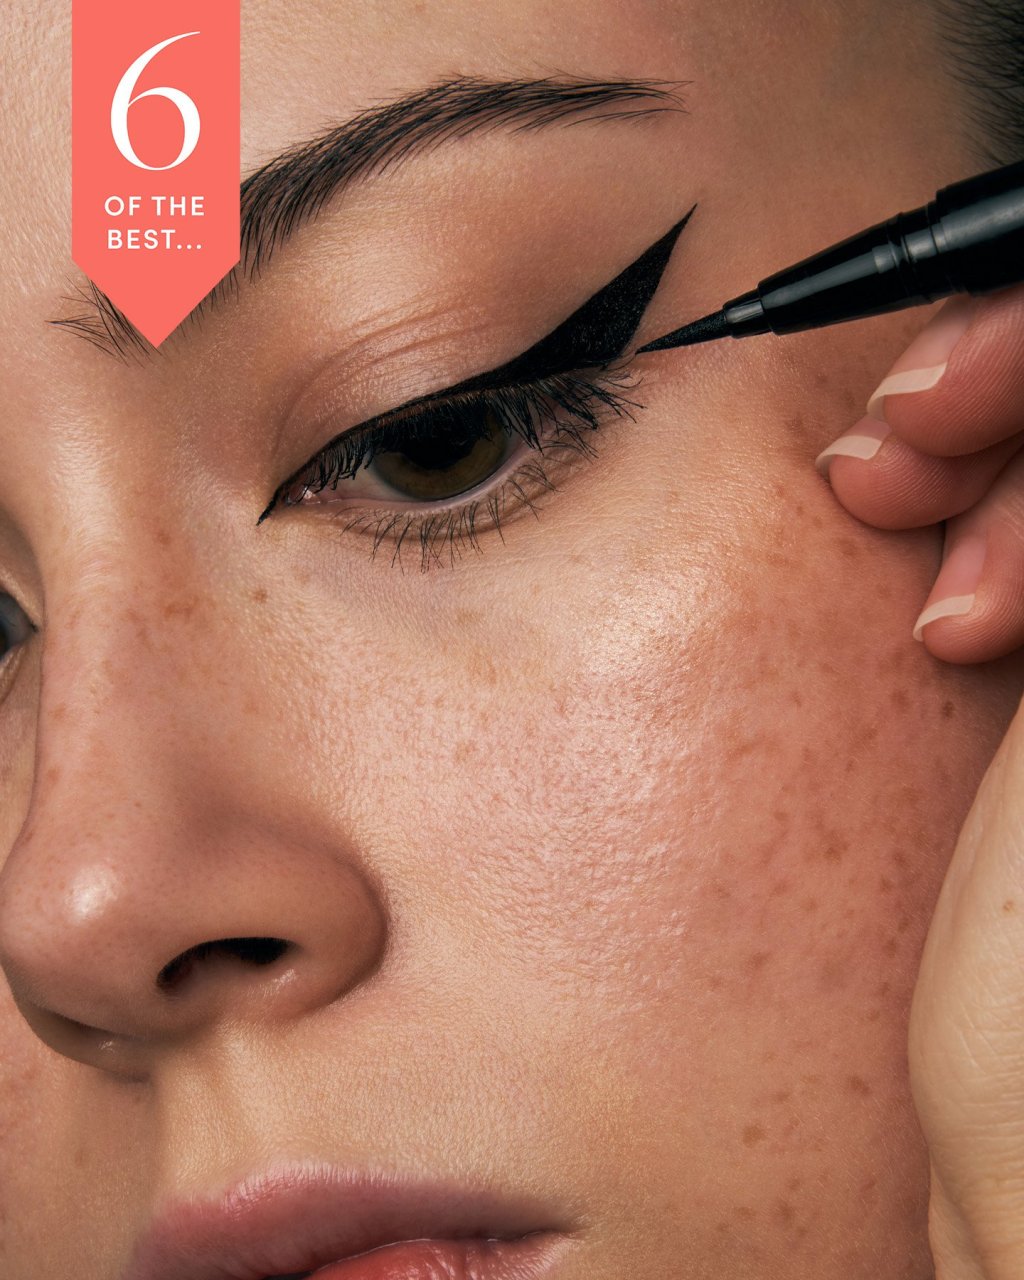 Graphic Liner - Beauty Photos, Trends & News